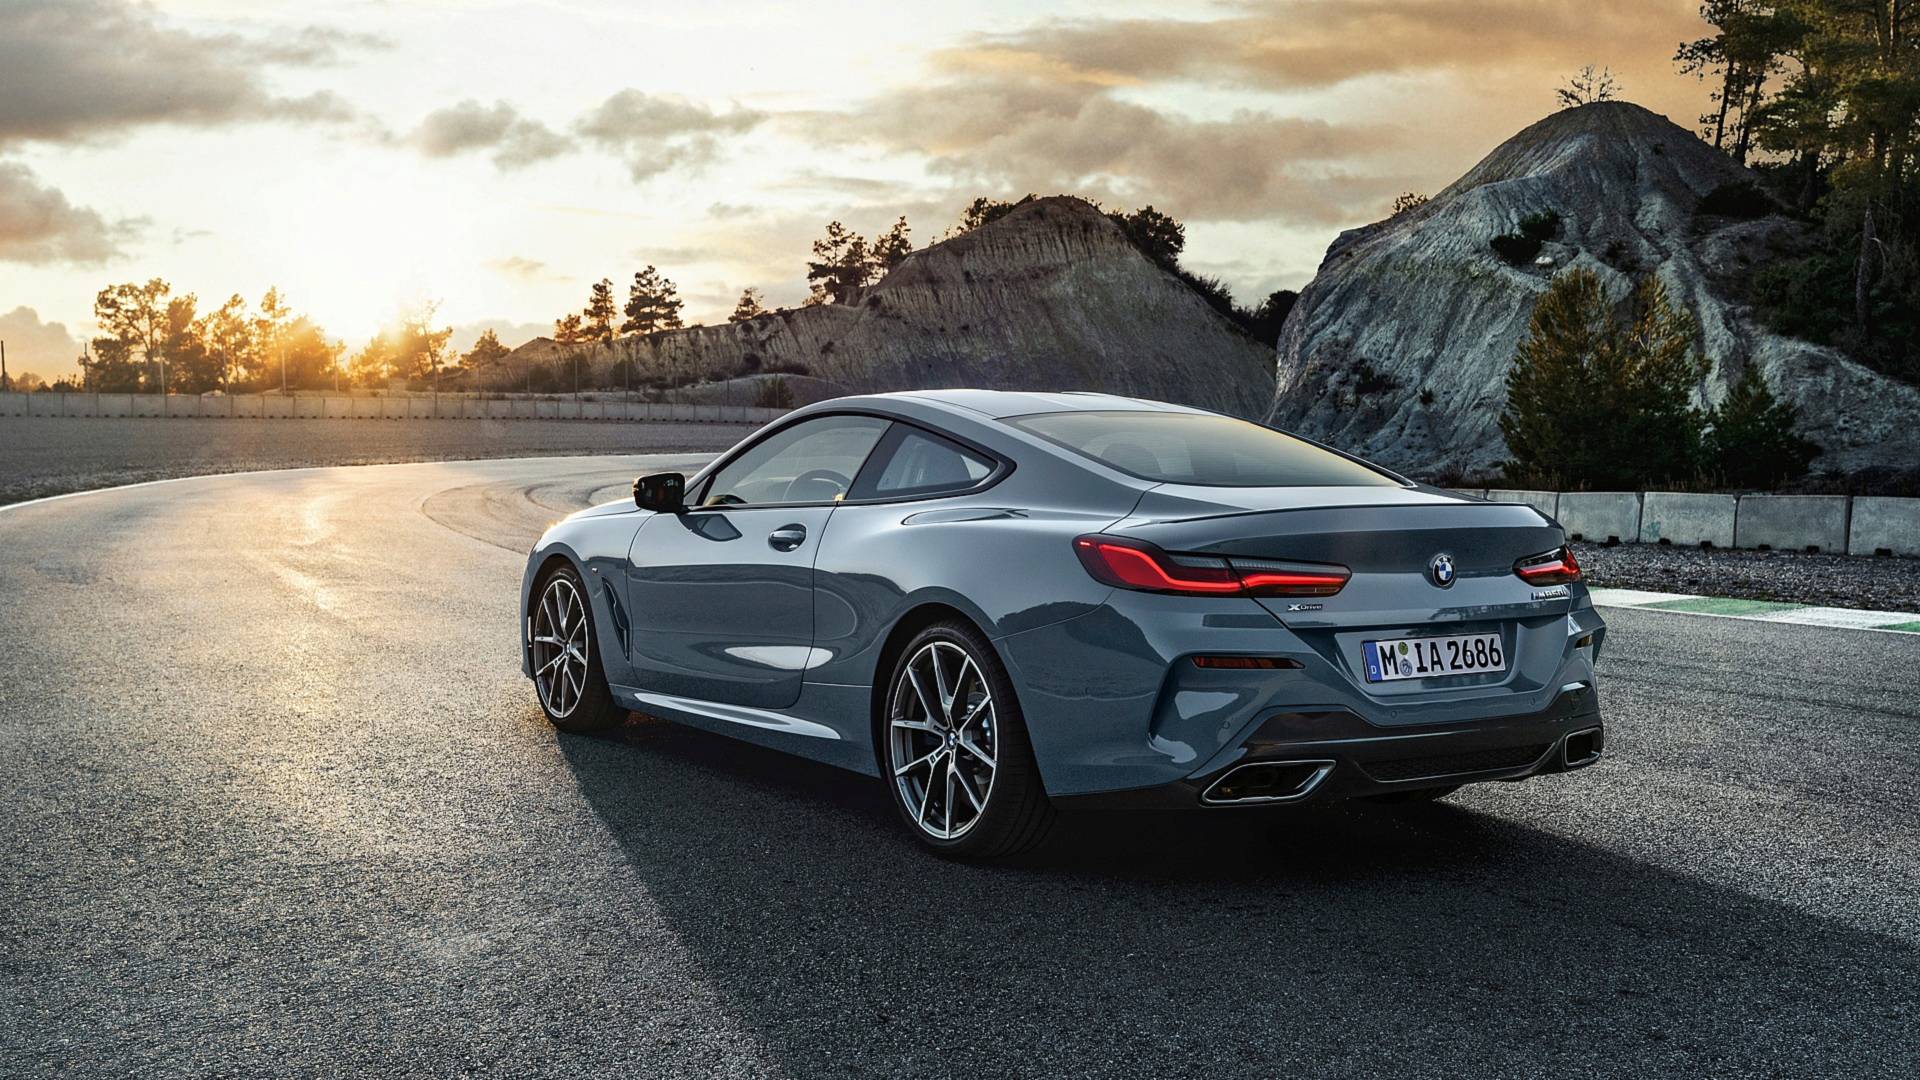 BMW 8 Series Going On Sale In the U.S. From $900